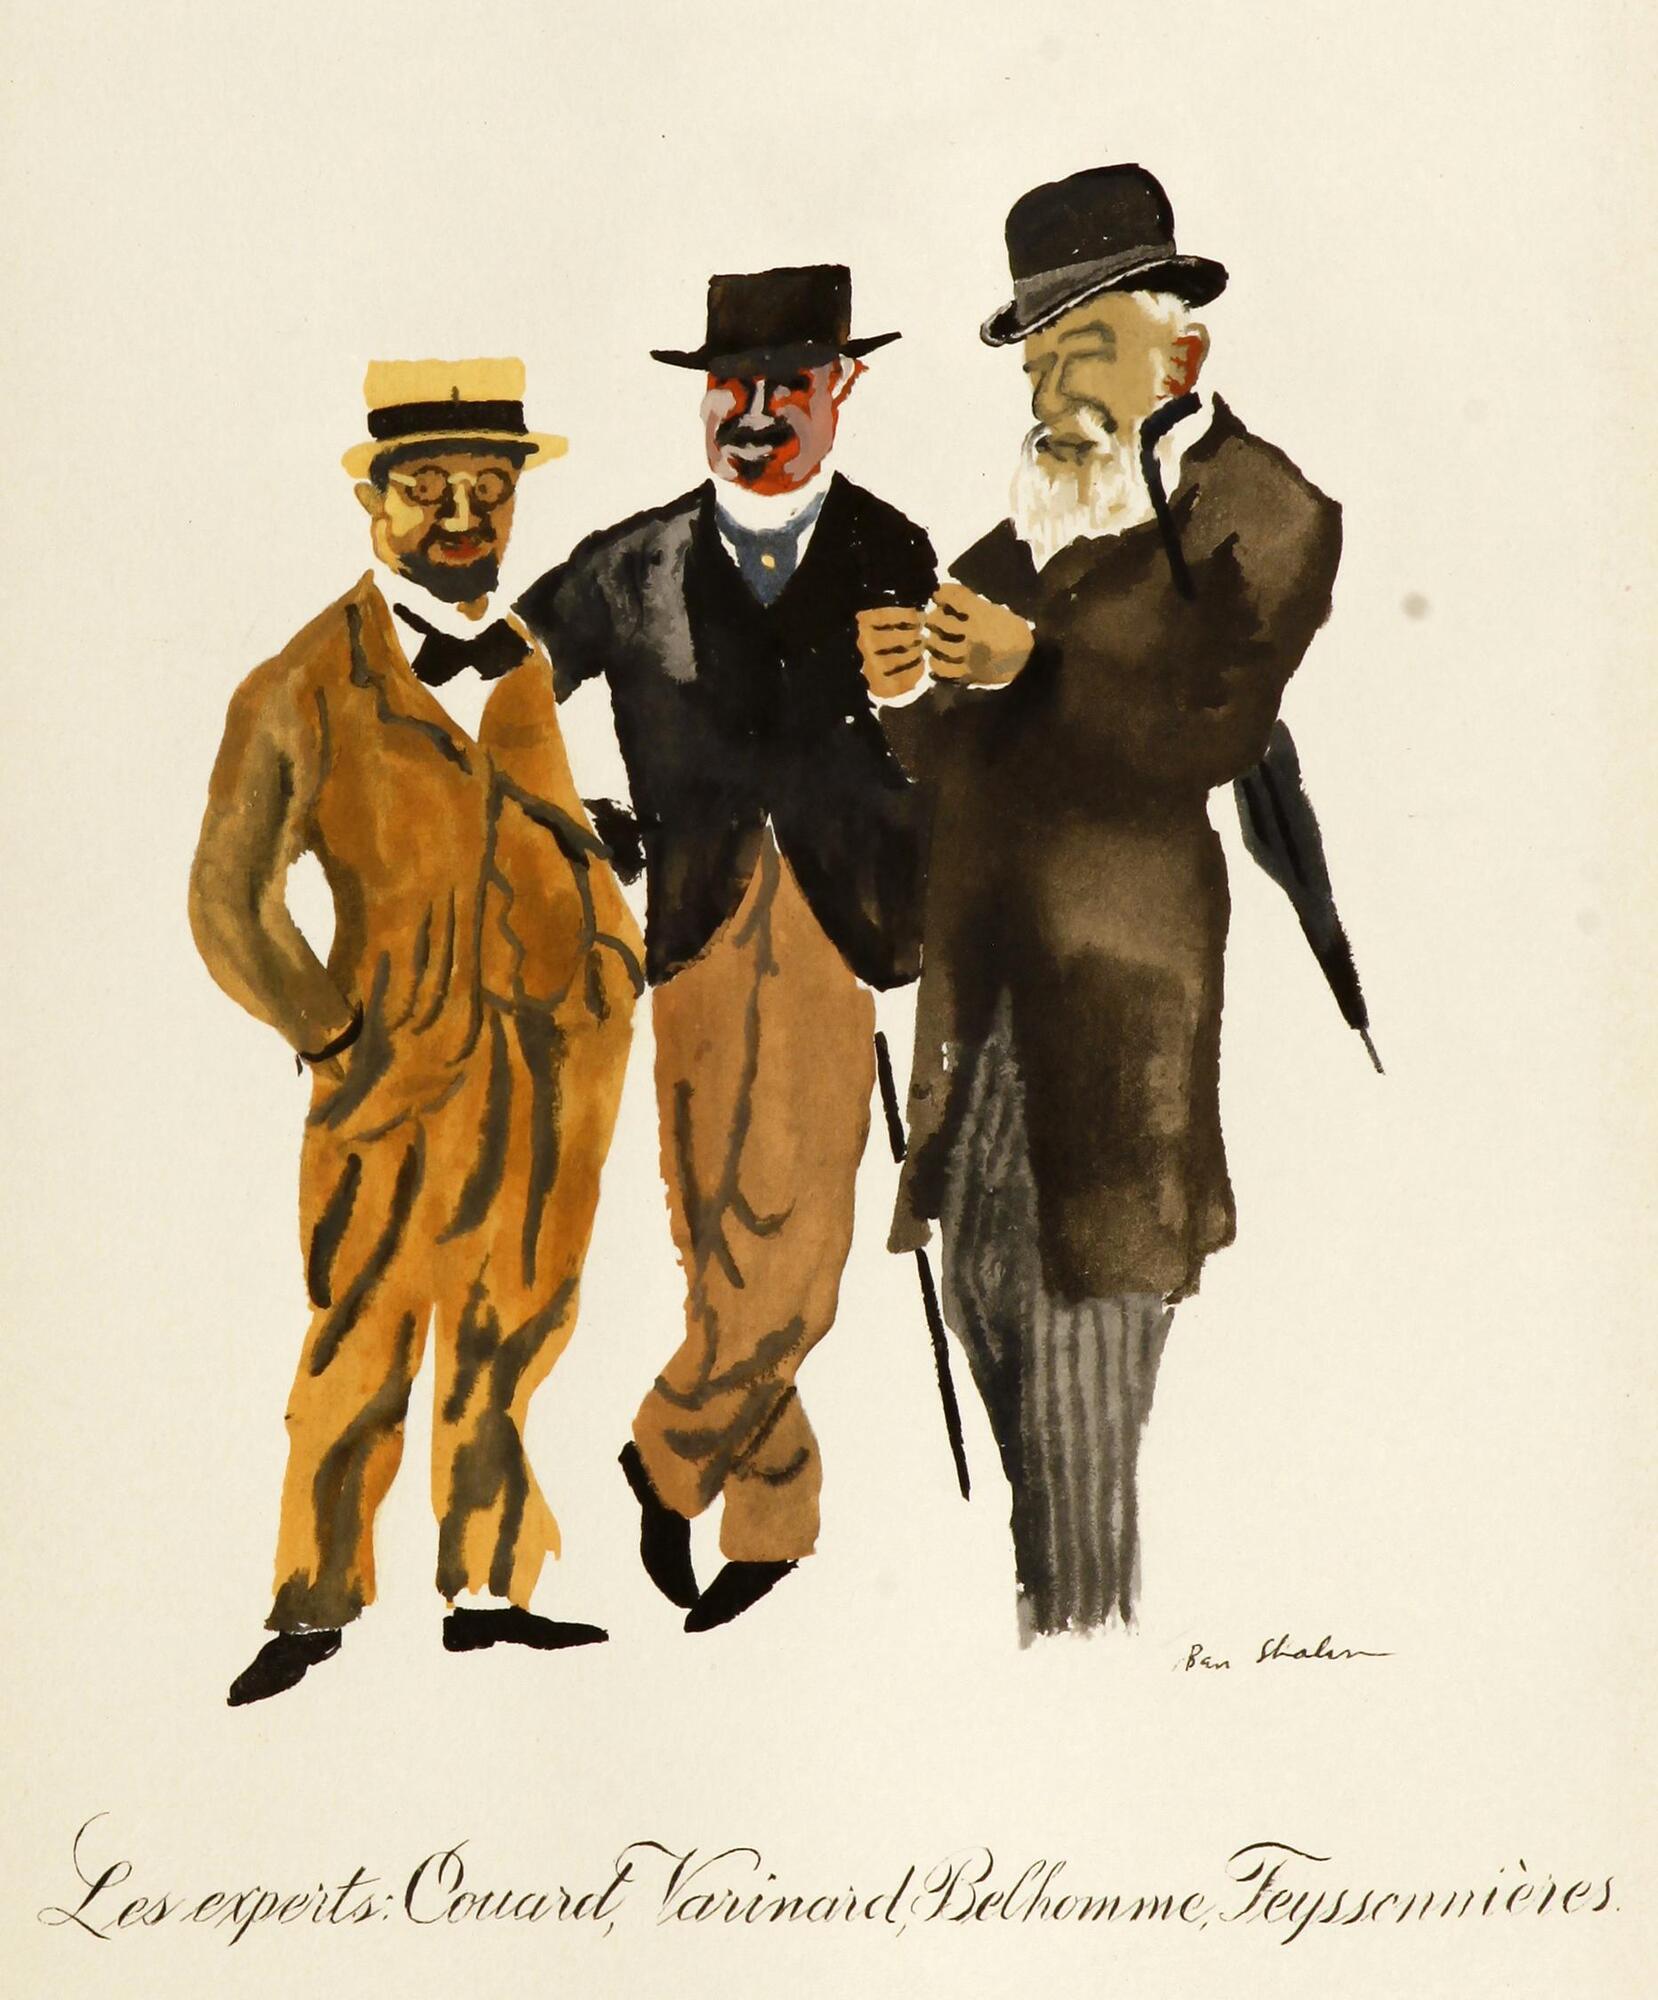 Three men stand side by side.  Each is well-dressed in both a suit and hat.  The men are painted with loose brush strokes with minimal details.  Their gaze is focused on the left side of the portrait.